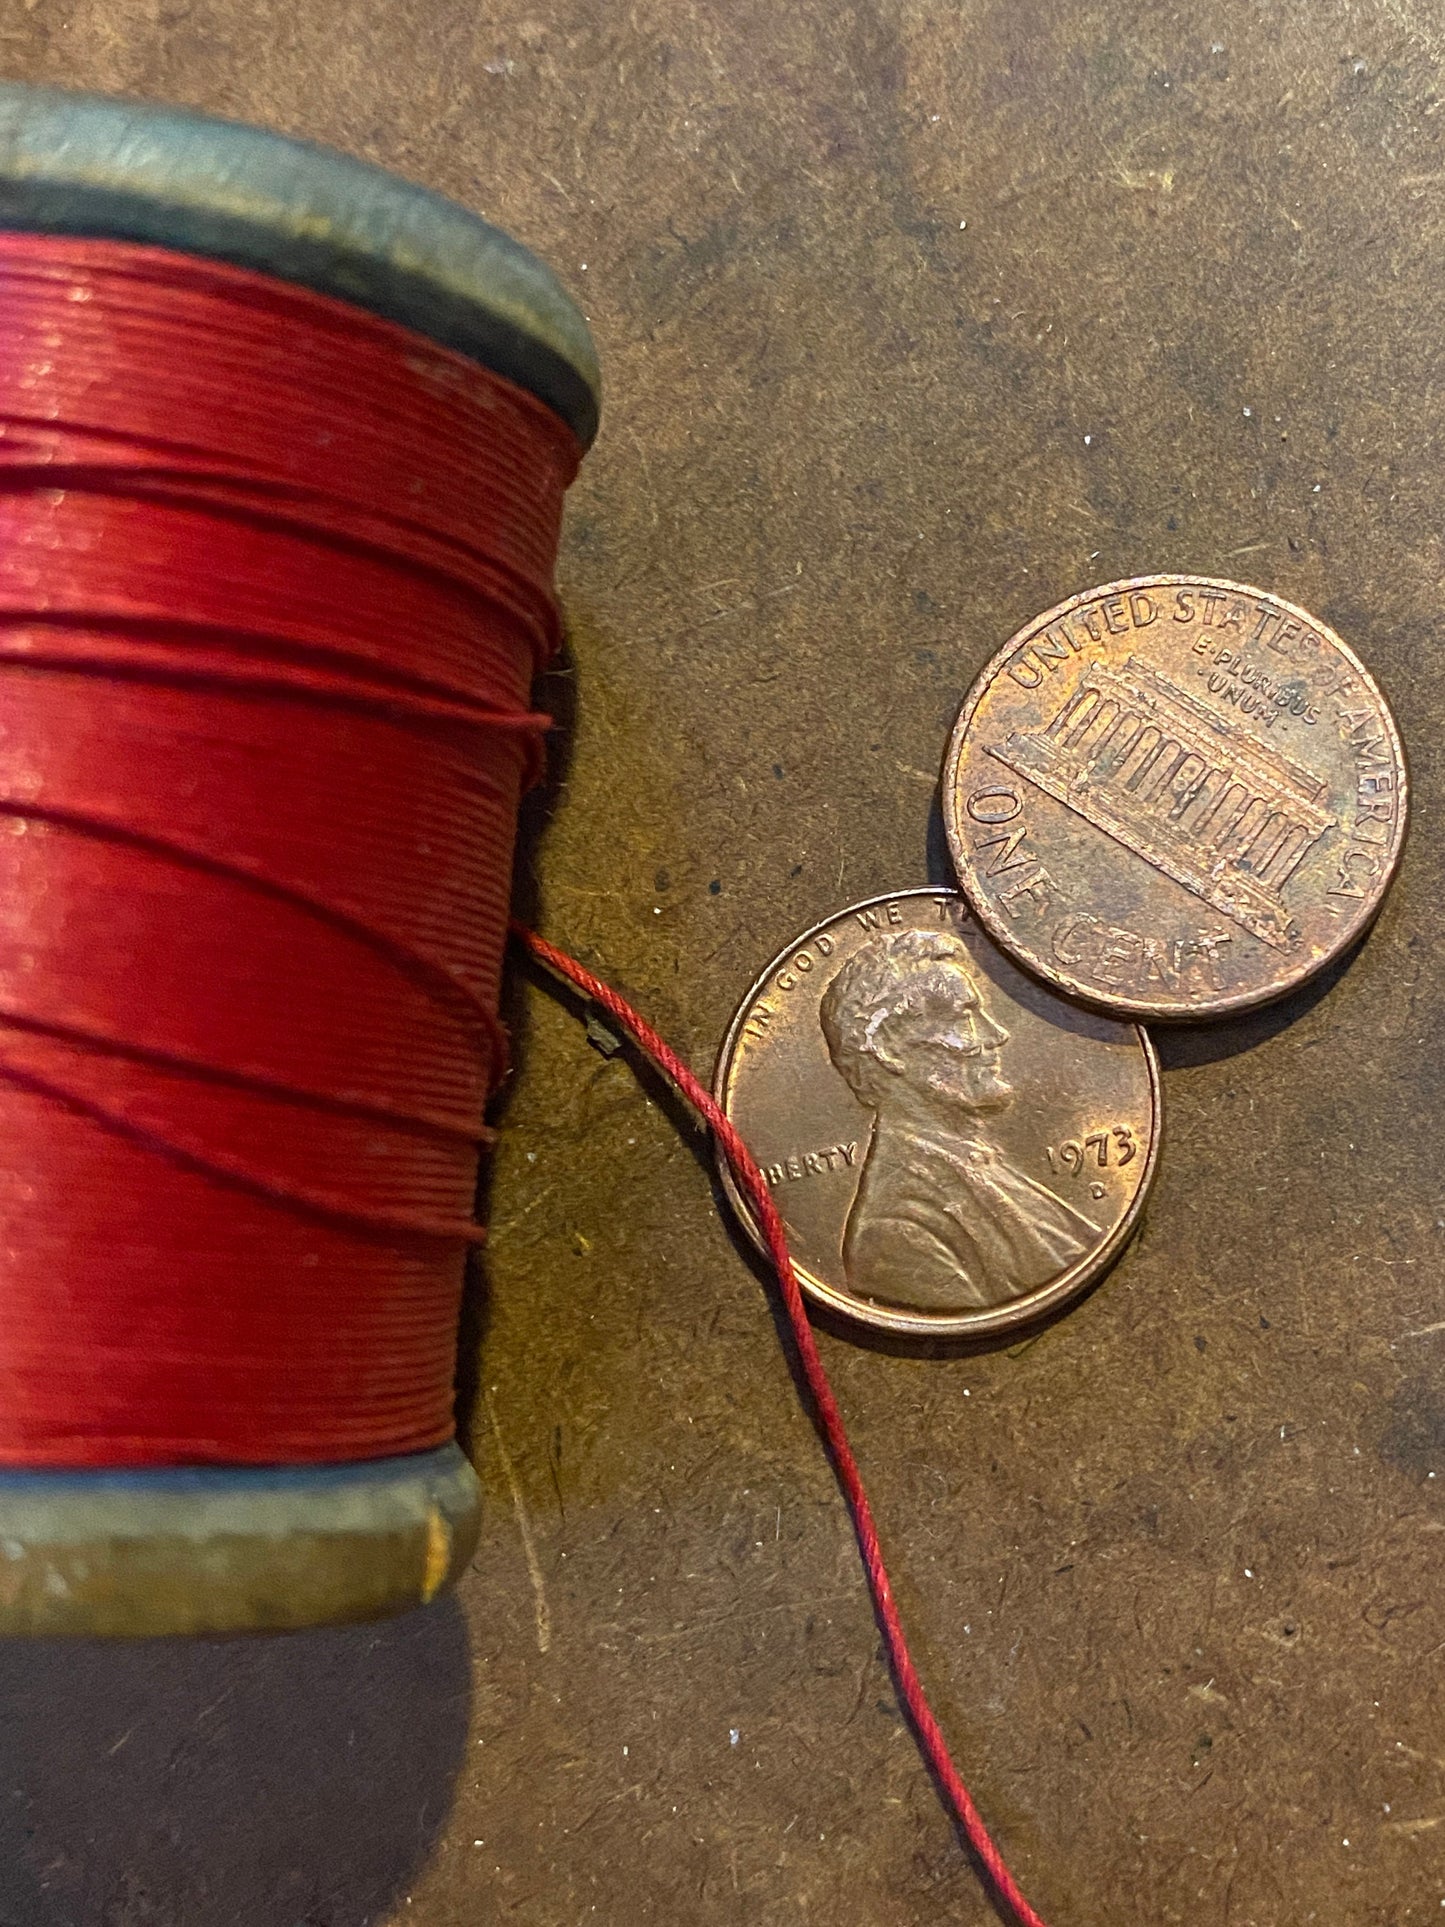 5 yards of heavy duty button and carpet utility thread / strong vintage cord / repair, retie, reattach / durable sewing string